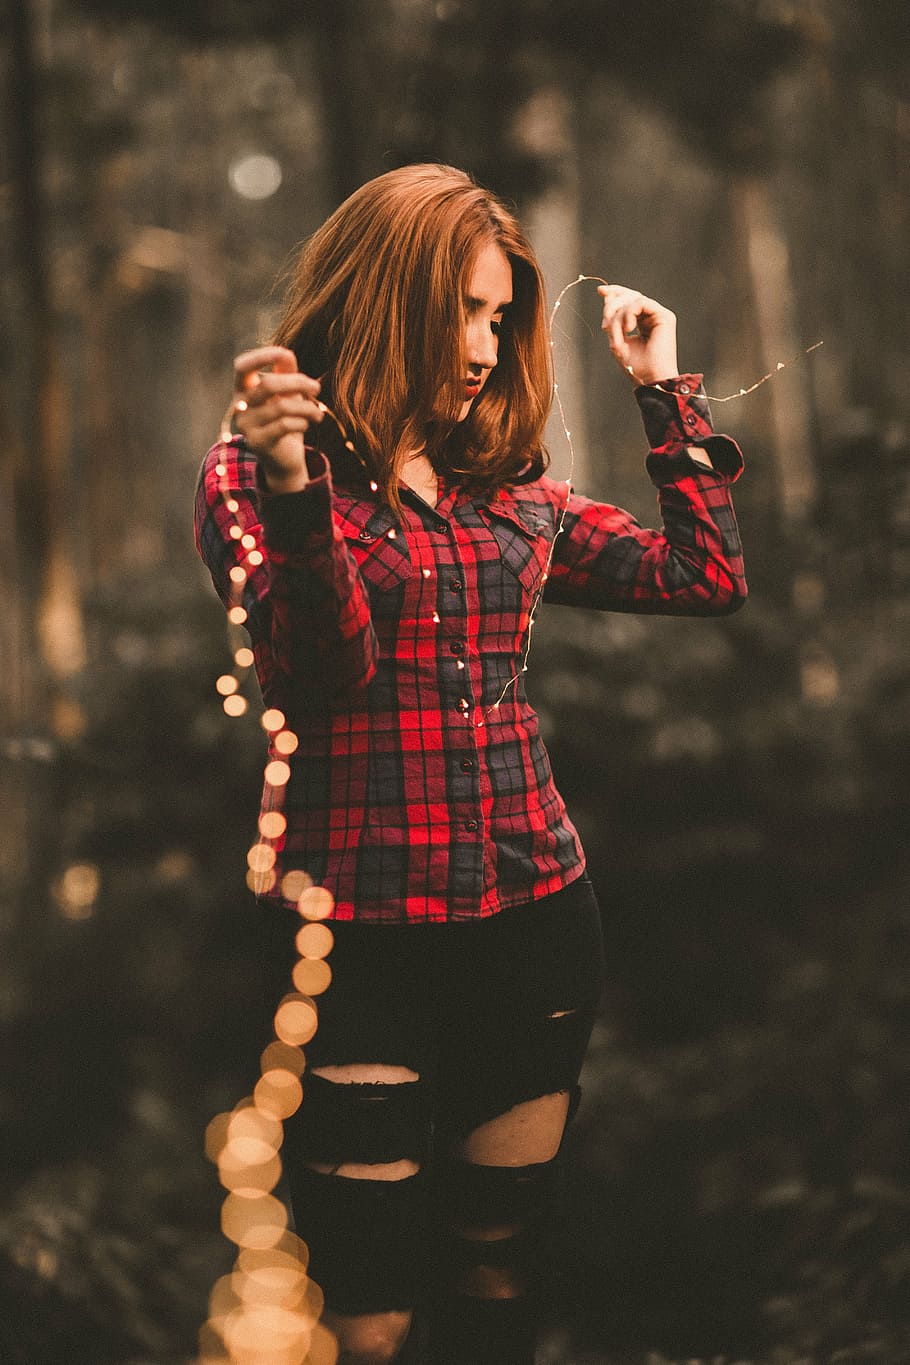 woman, holding, yellow, string lights, people, girl, ripped, jeans, ripped jeans, outdoor